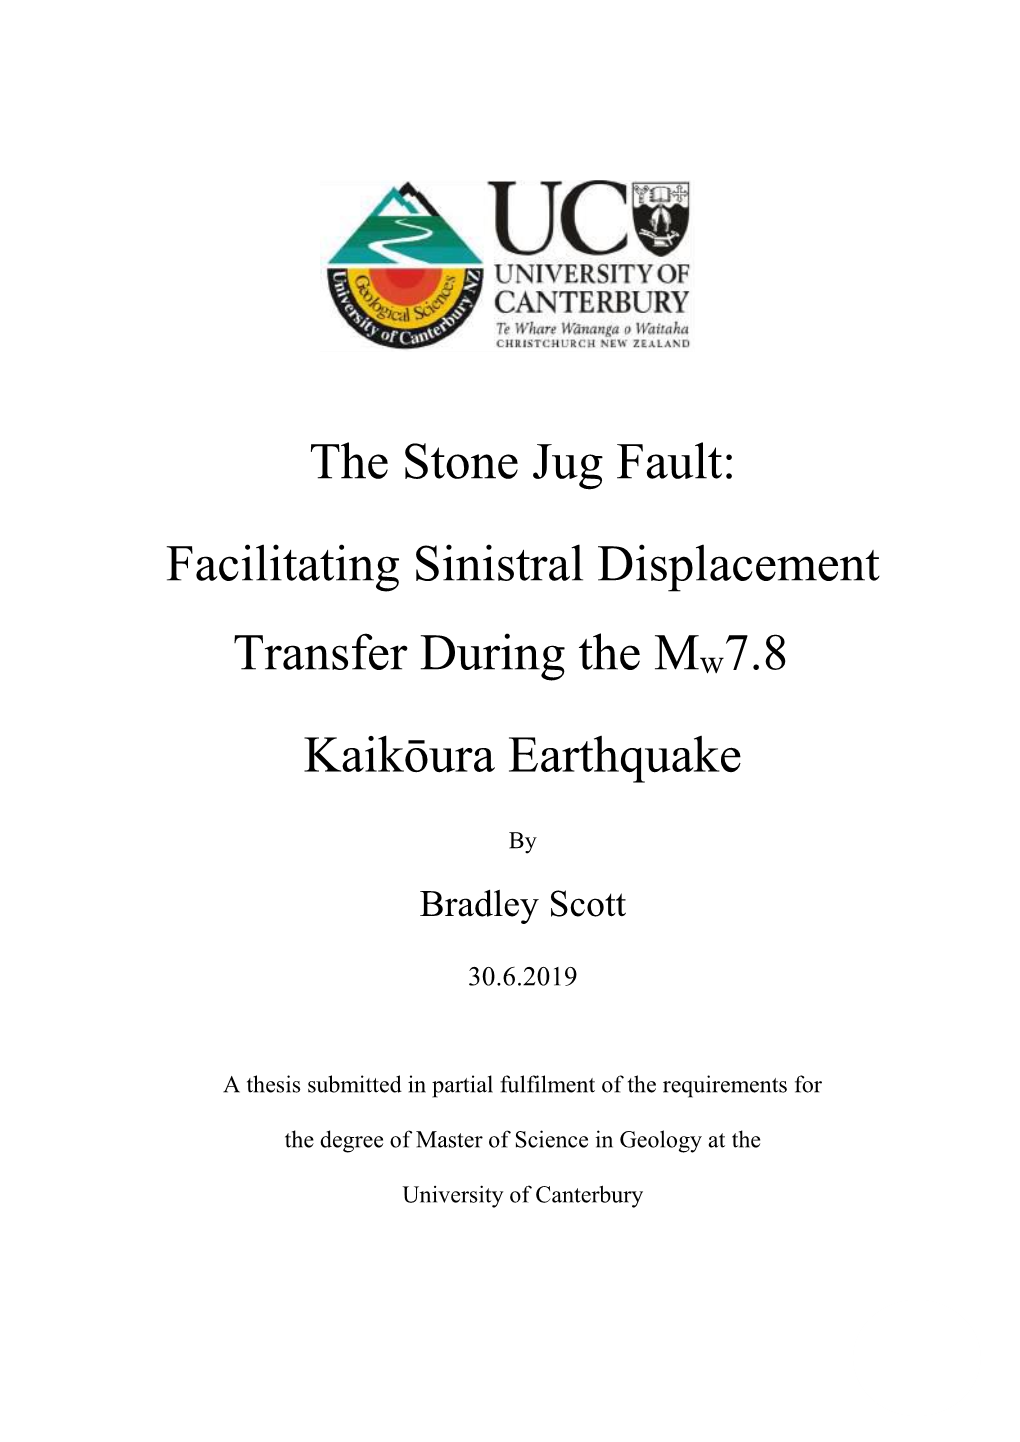 The Stone Jug Fault: Facilitating Sinistral Displacement